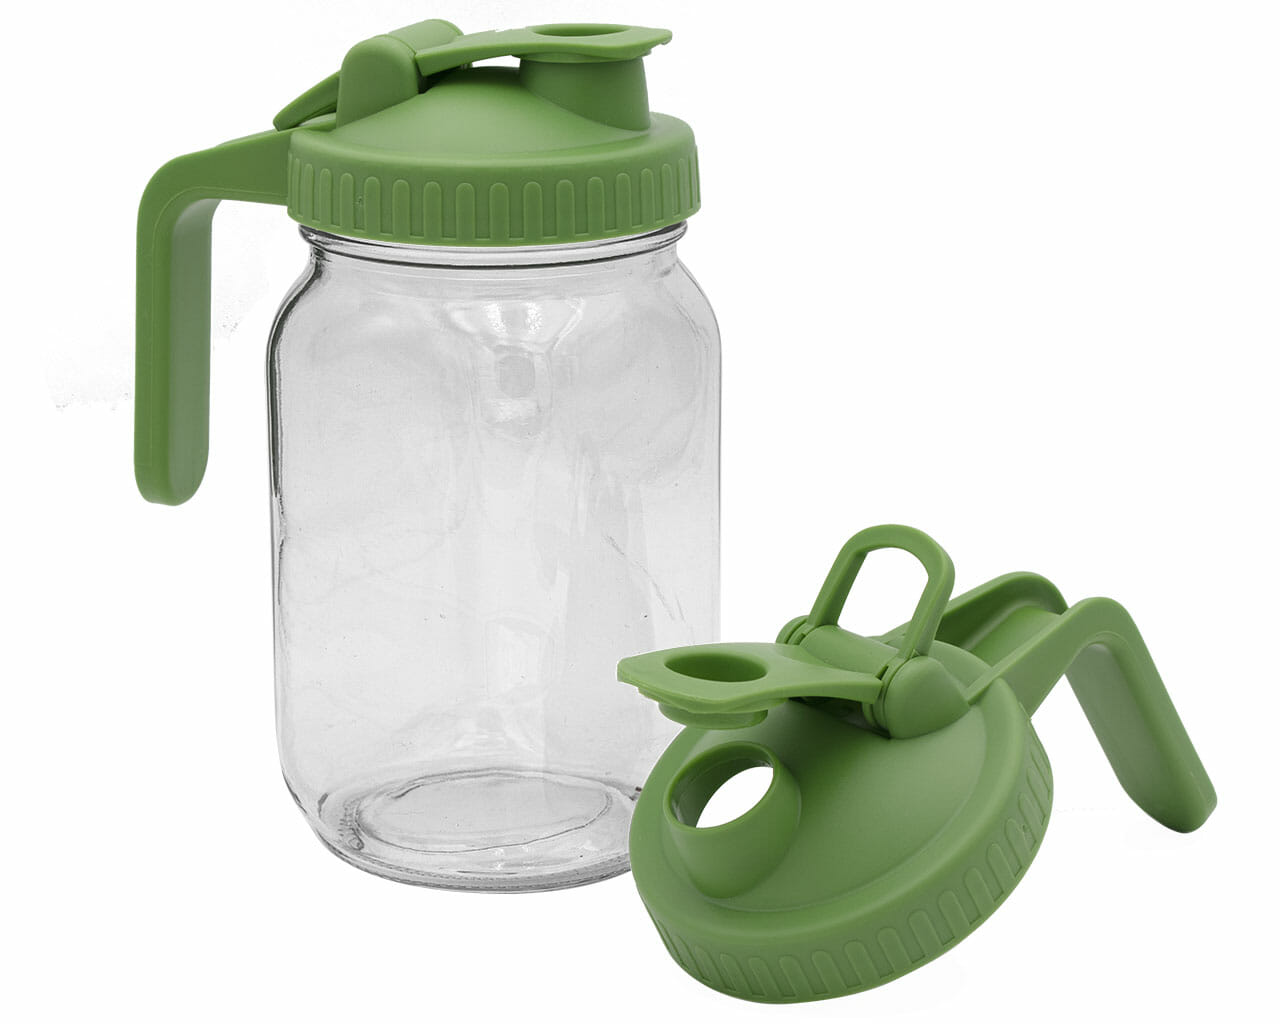 Glass jar with handle and screw cap